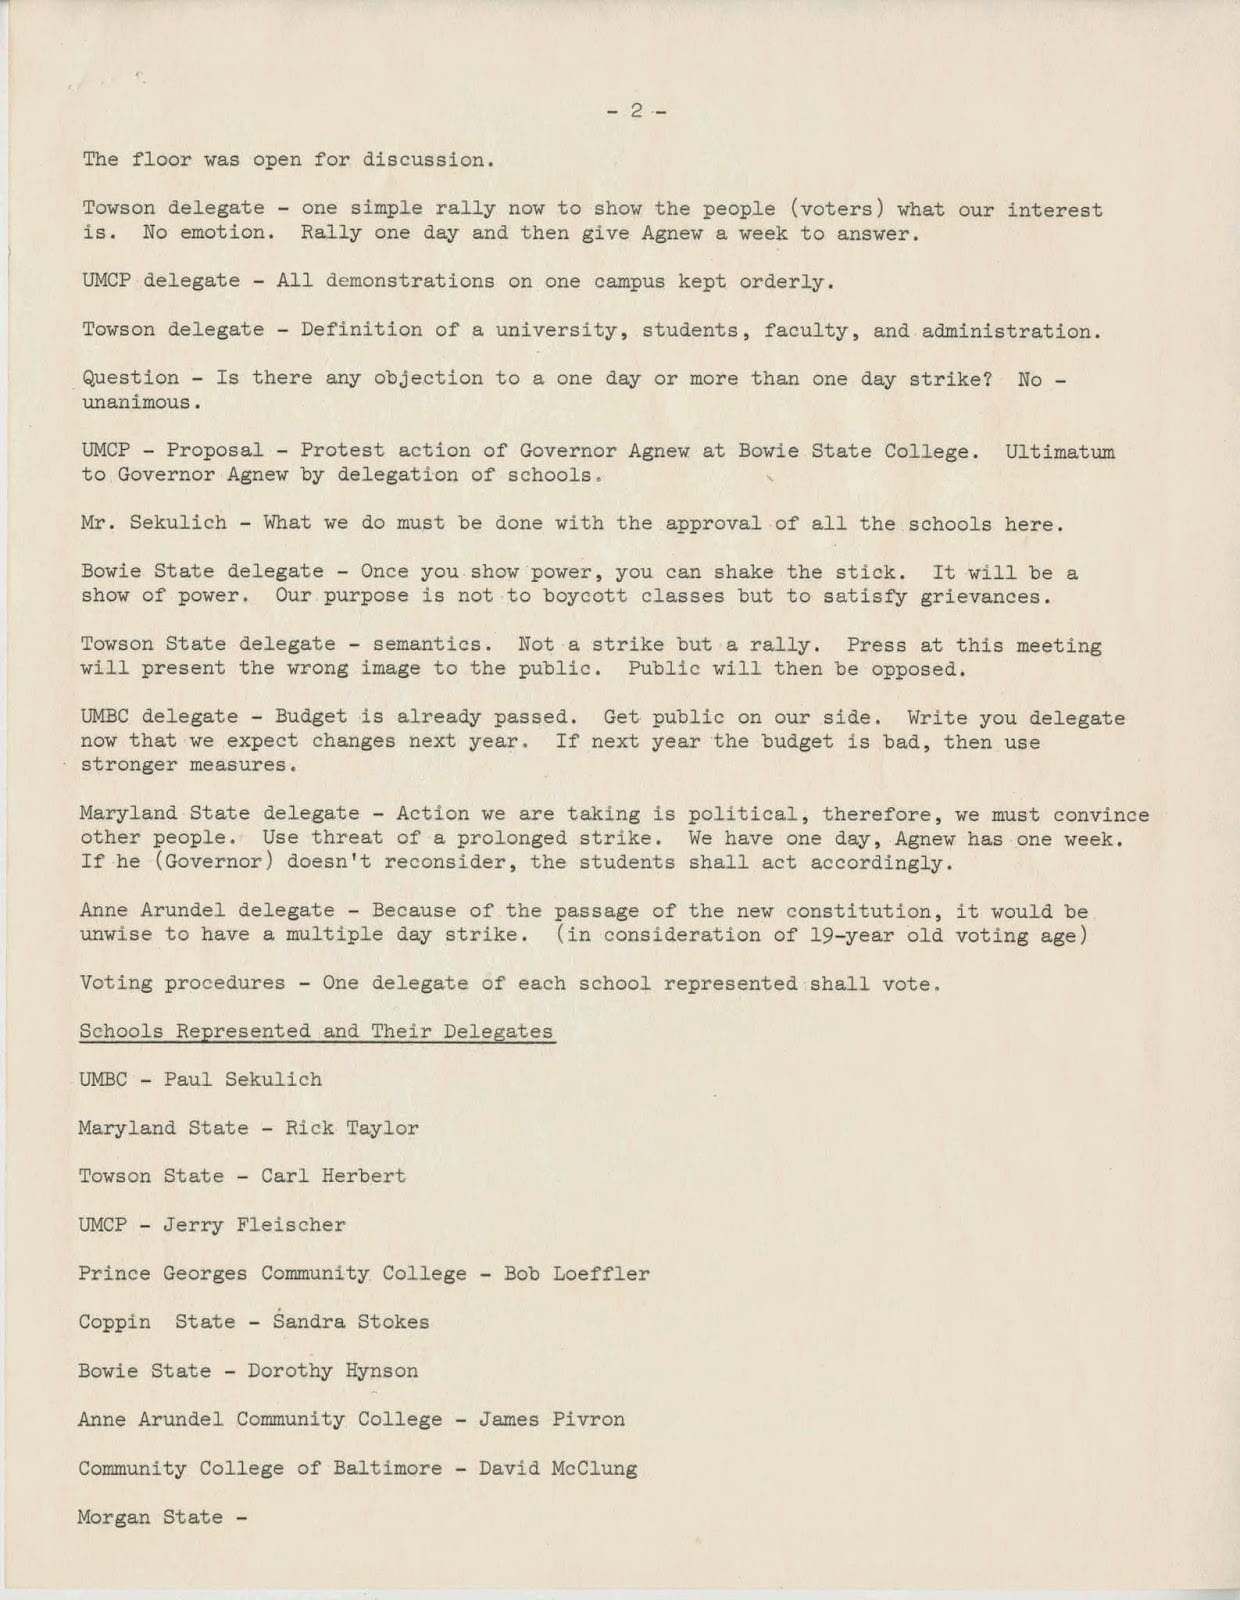 This meeting occurred the day after Martin Luther King Jr.’s assassination. The heads of student government bodies at universities in Maryland met to discuss state issues, including funding for education and actions taken by Governor Spiro Agnew at Bowie State. Page 2. 